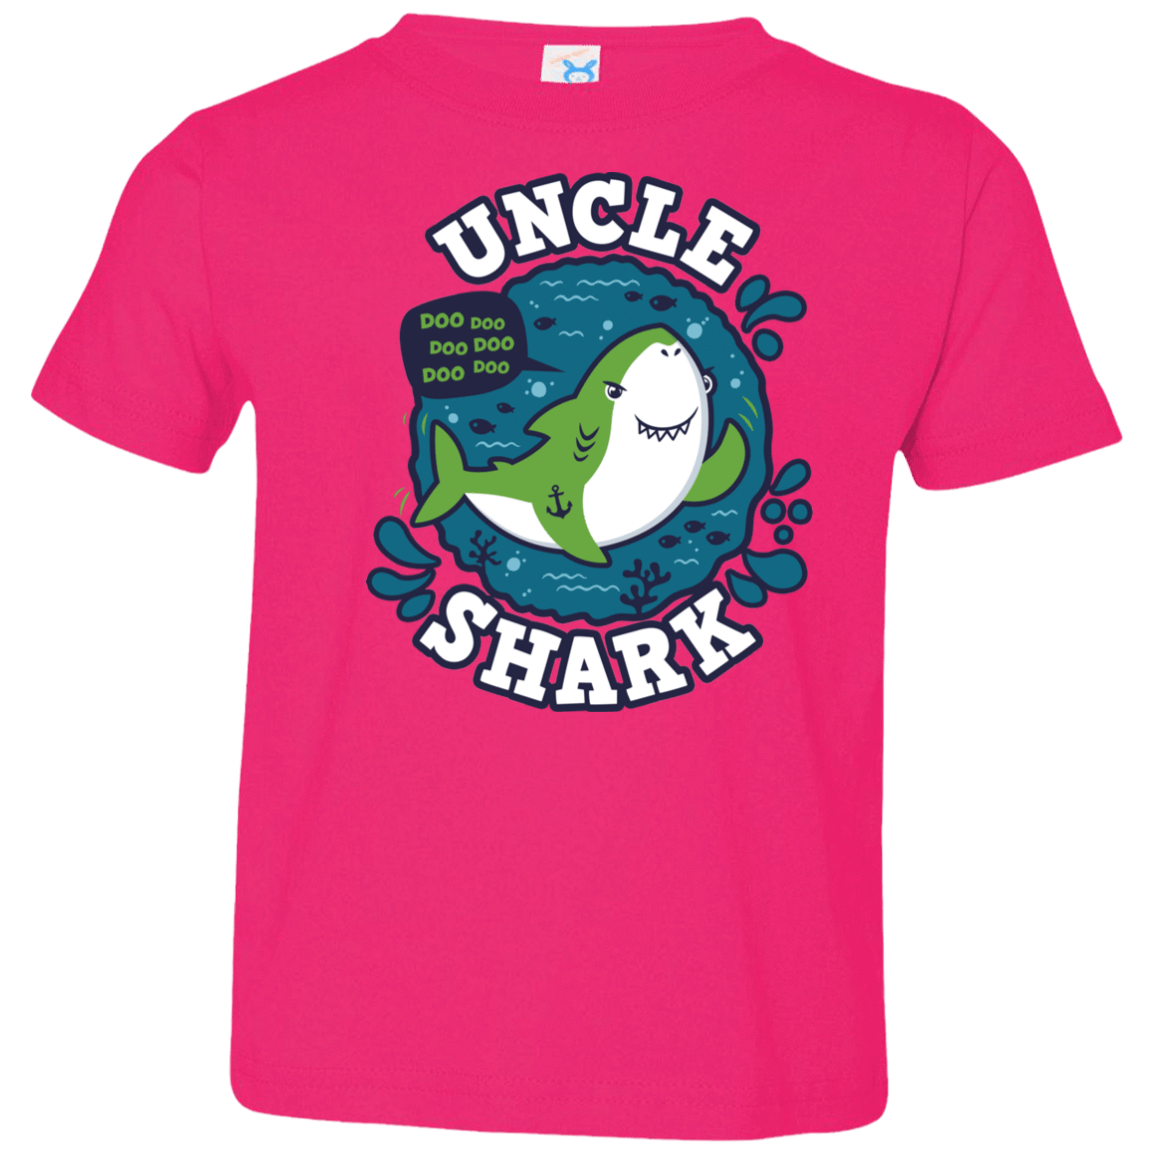 T-Shirts Hot Pink / 2T Shark Family trazo - Uncle Toddler Premium T-Shirt